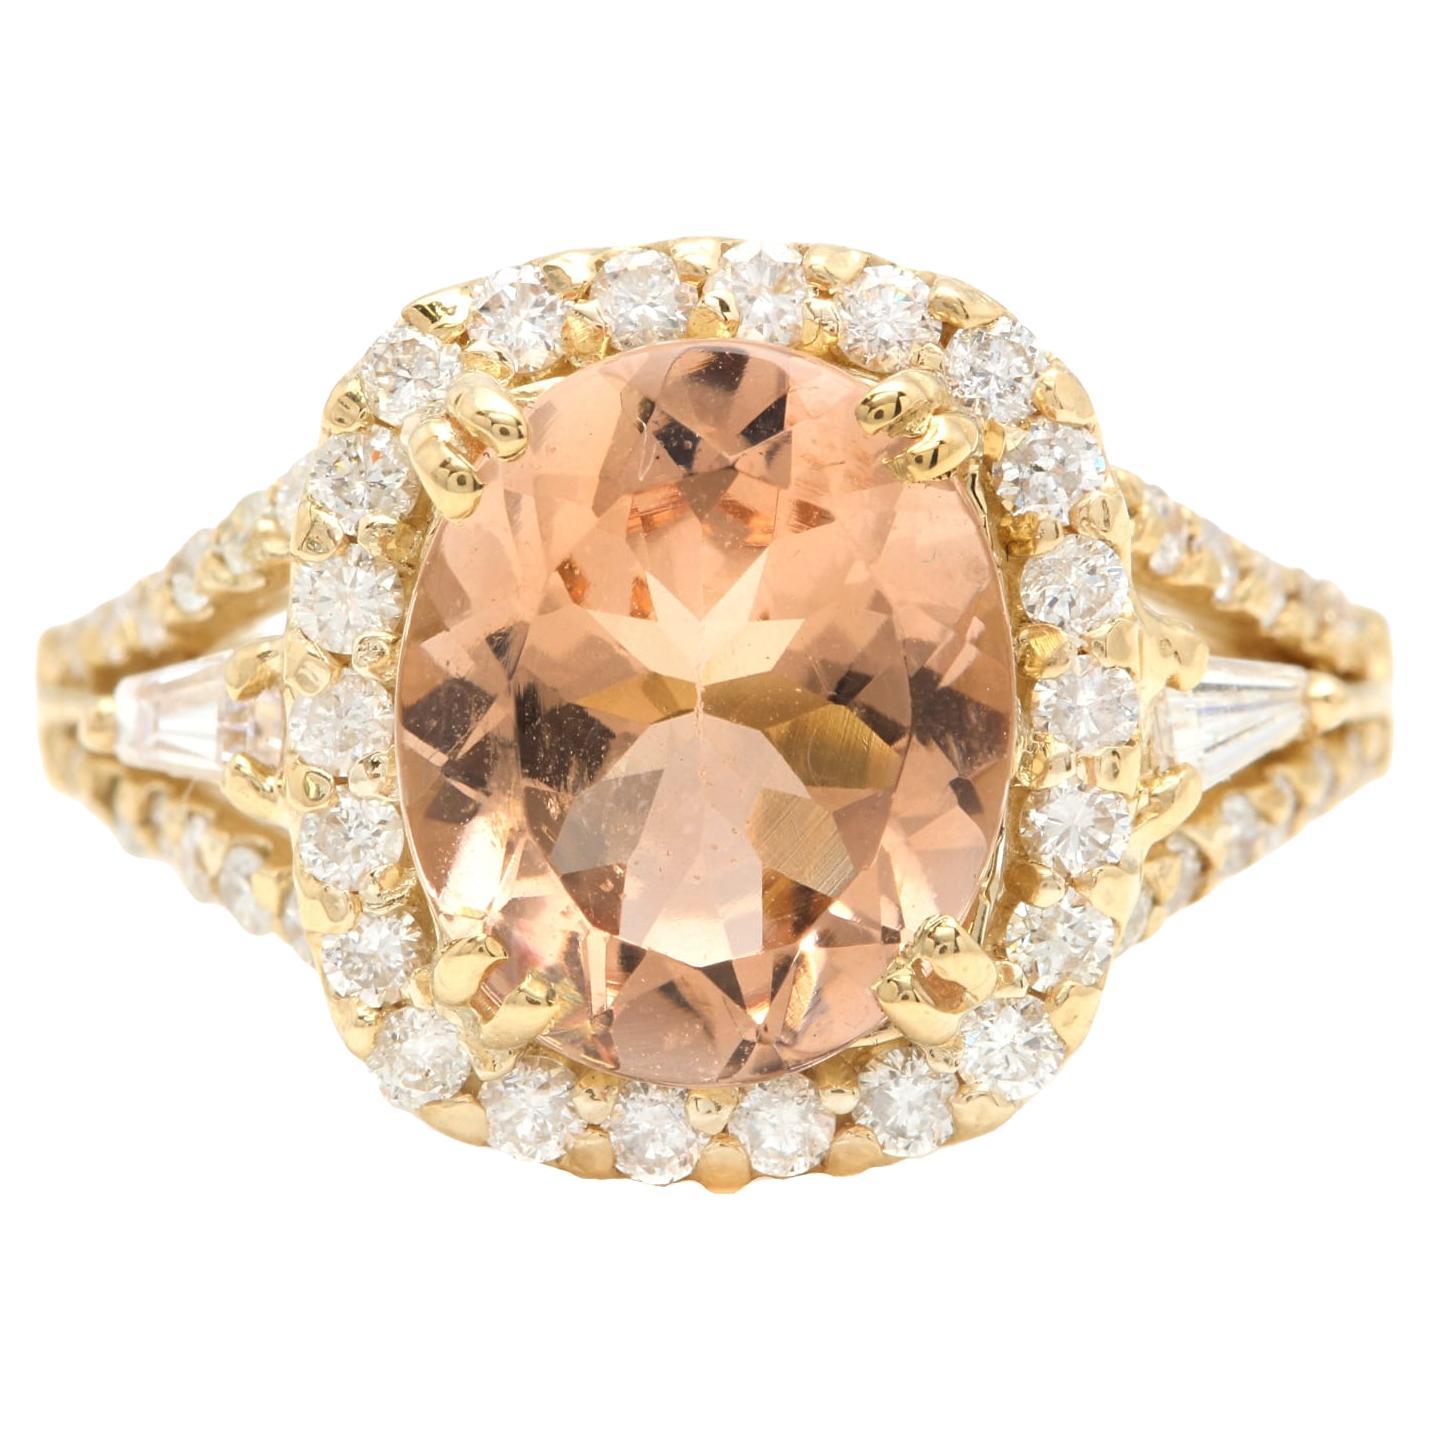 5.20 Carats Exquisite Natural Morganite and Diamond 14K Solid Yellow Gold Ring